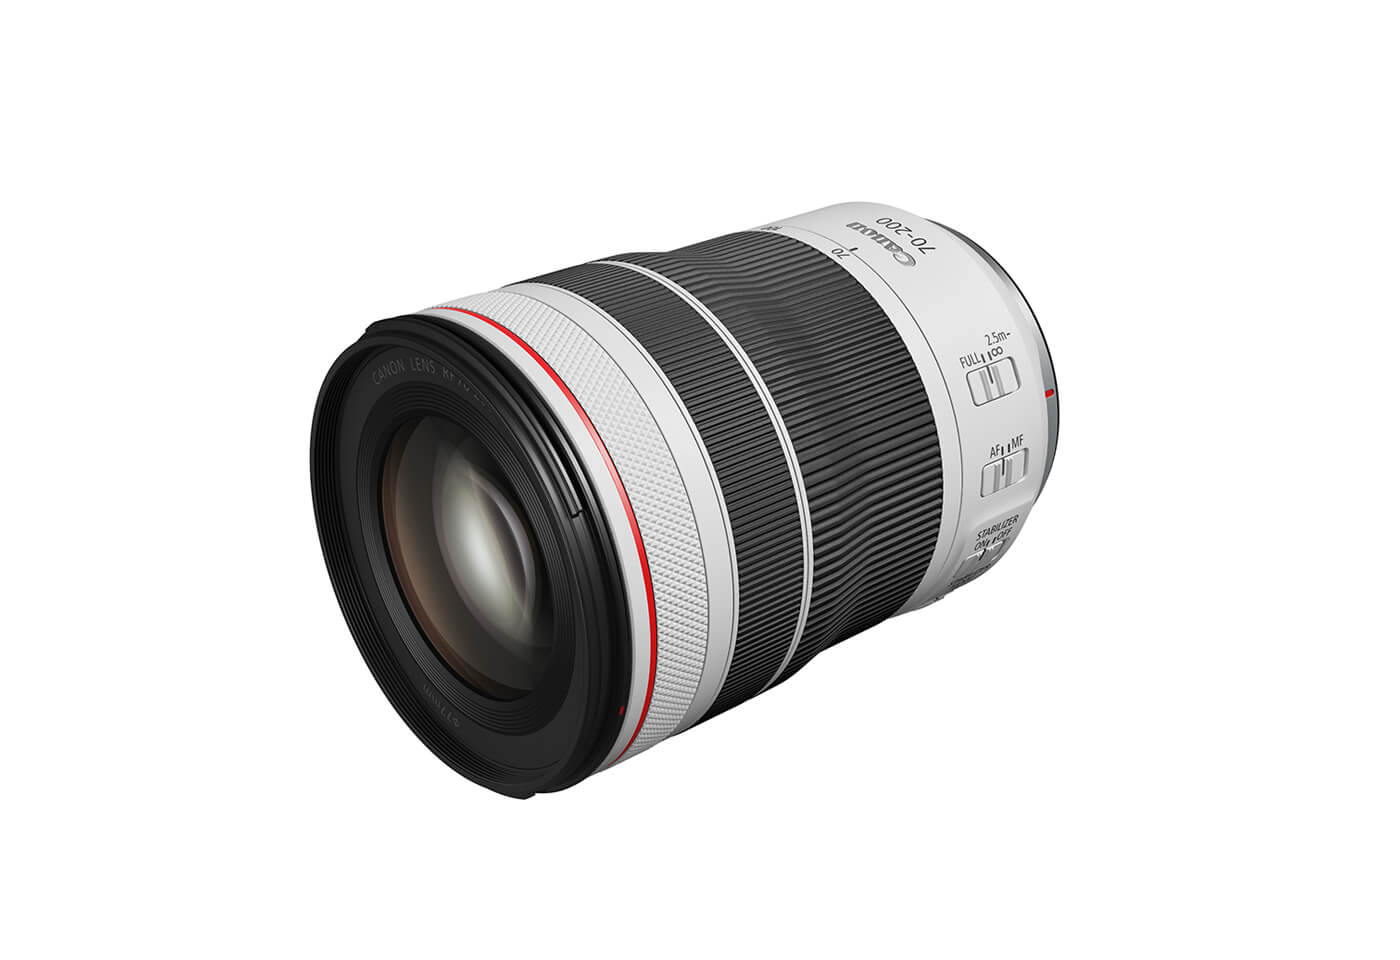 Front profile image of RF 70-200mm f/4 L IS USM telephoto lens